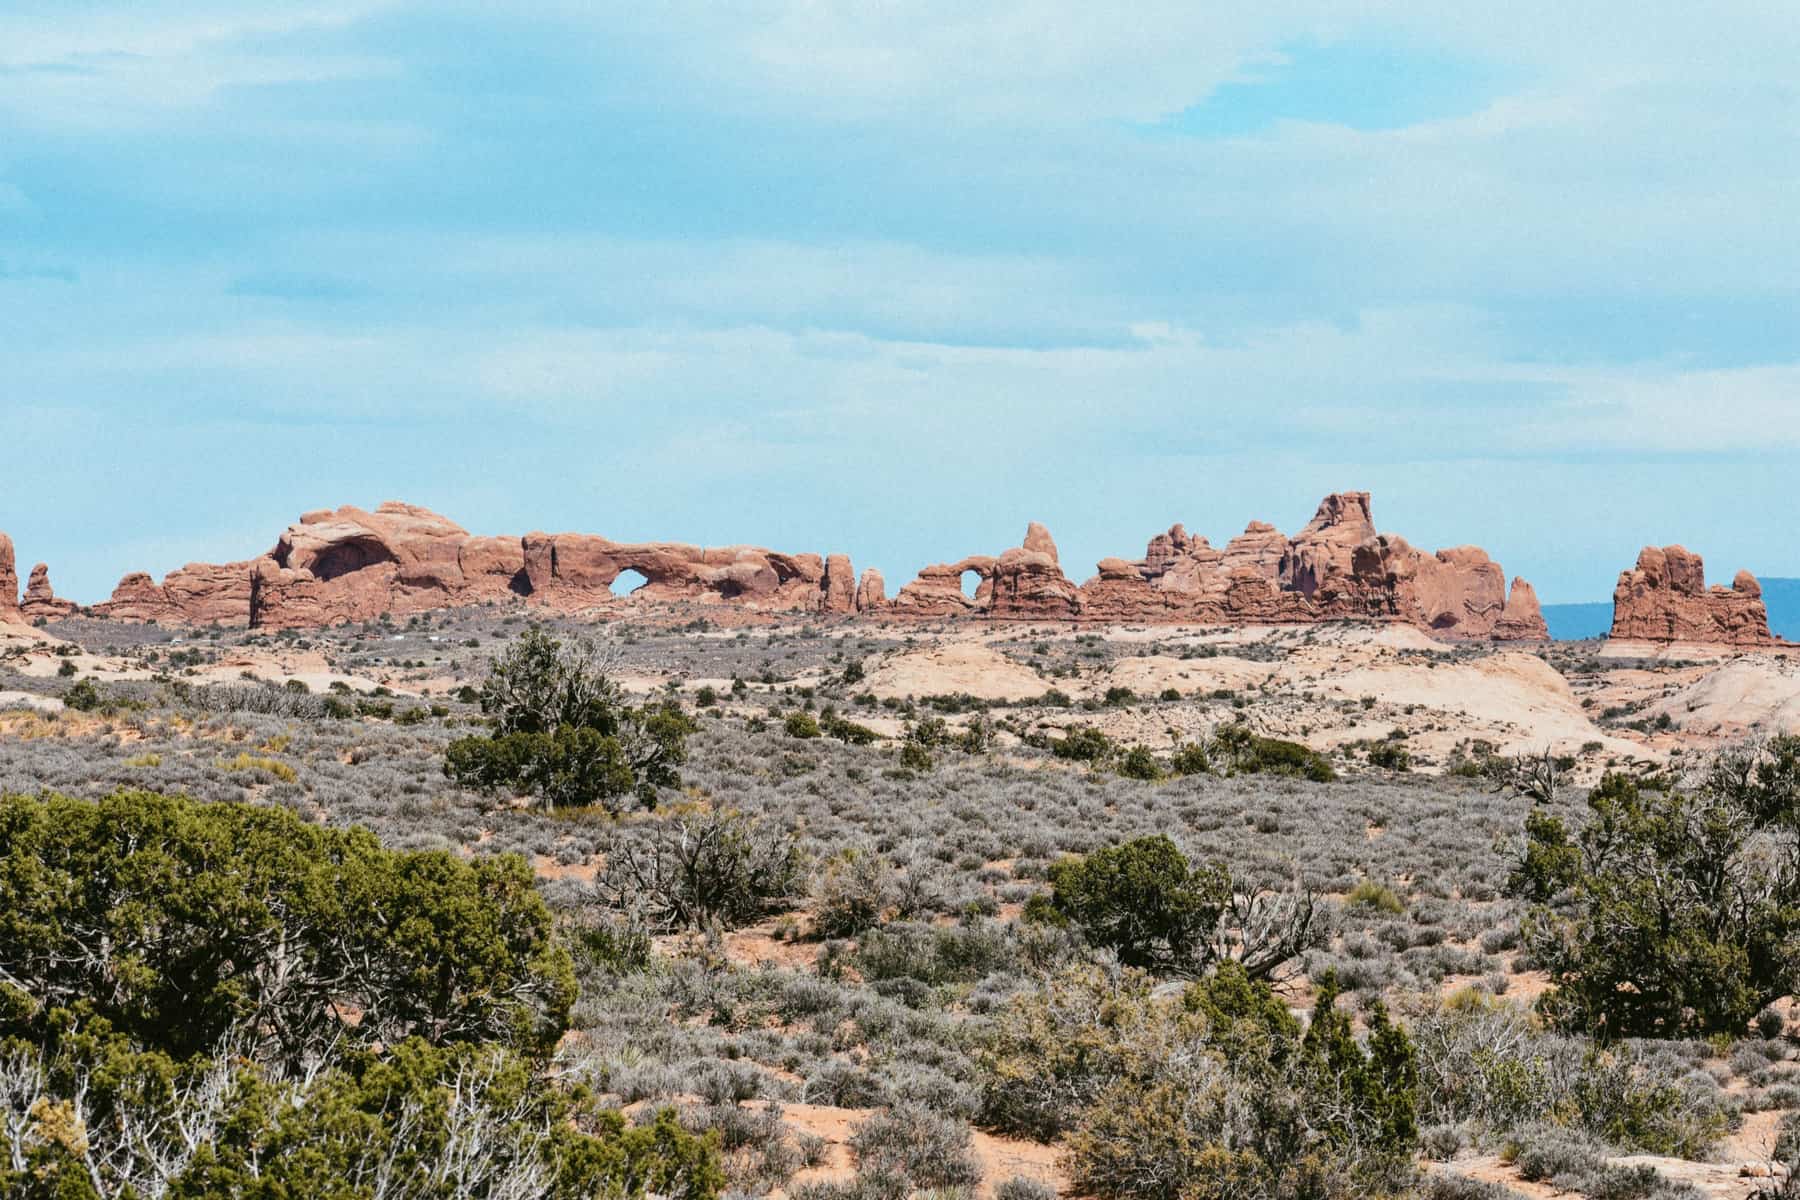 A landscape view of several arches.